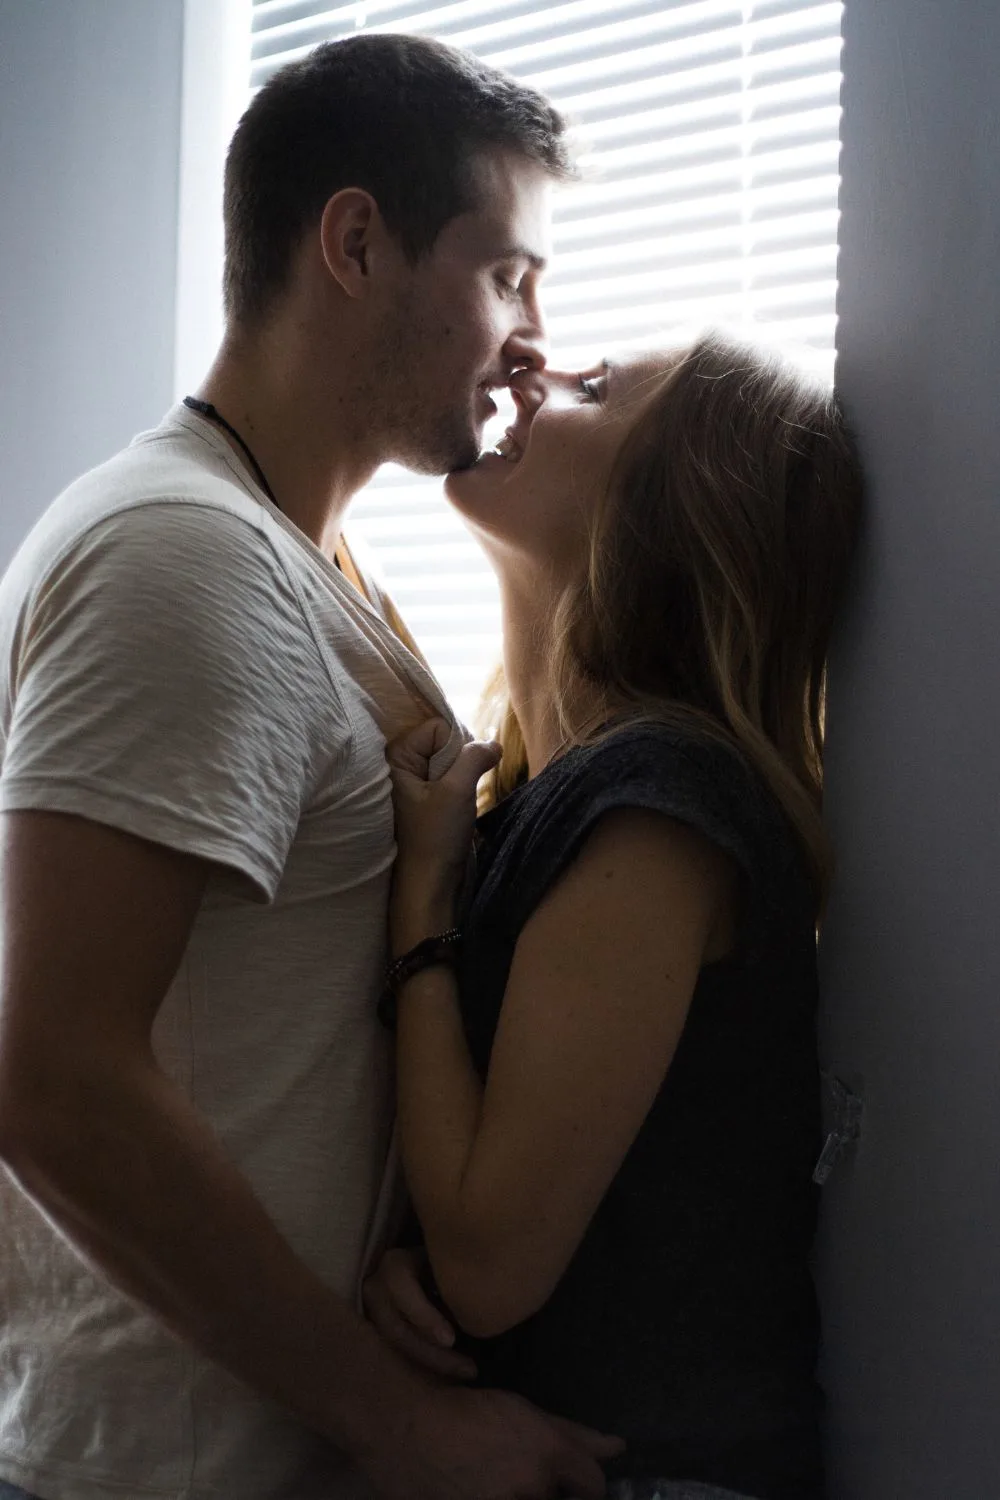 What happens when married couples stop kissing